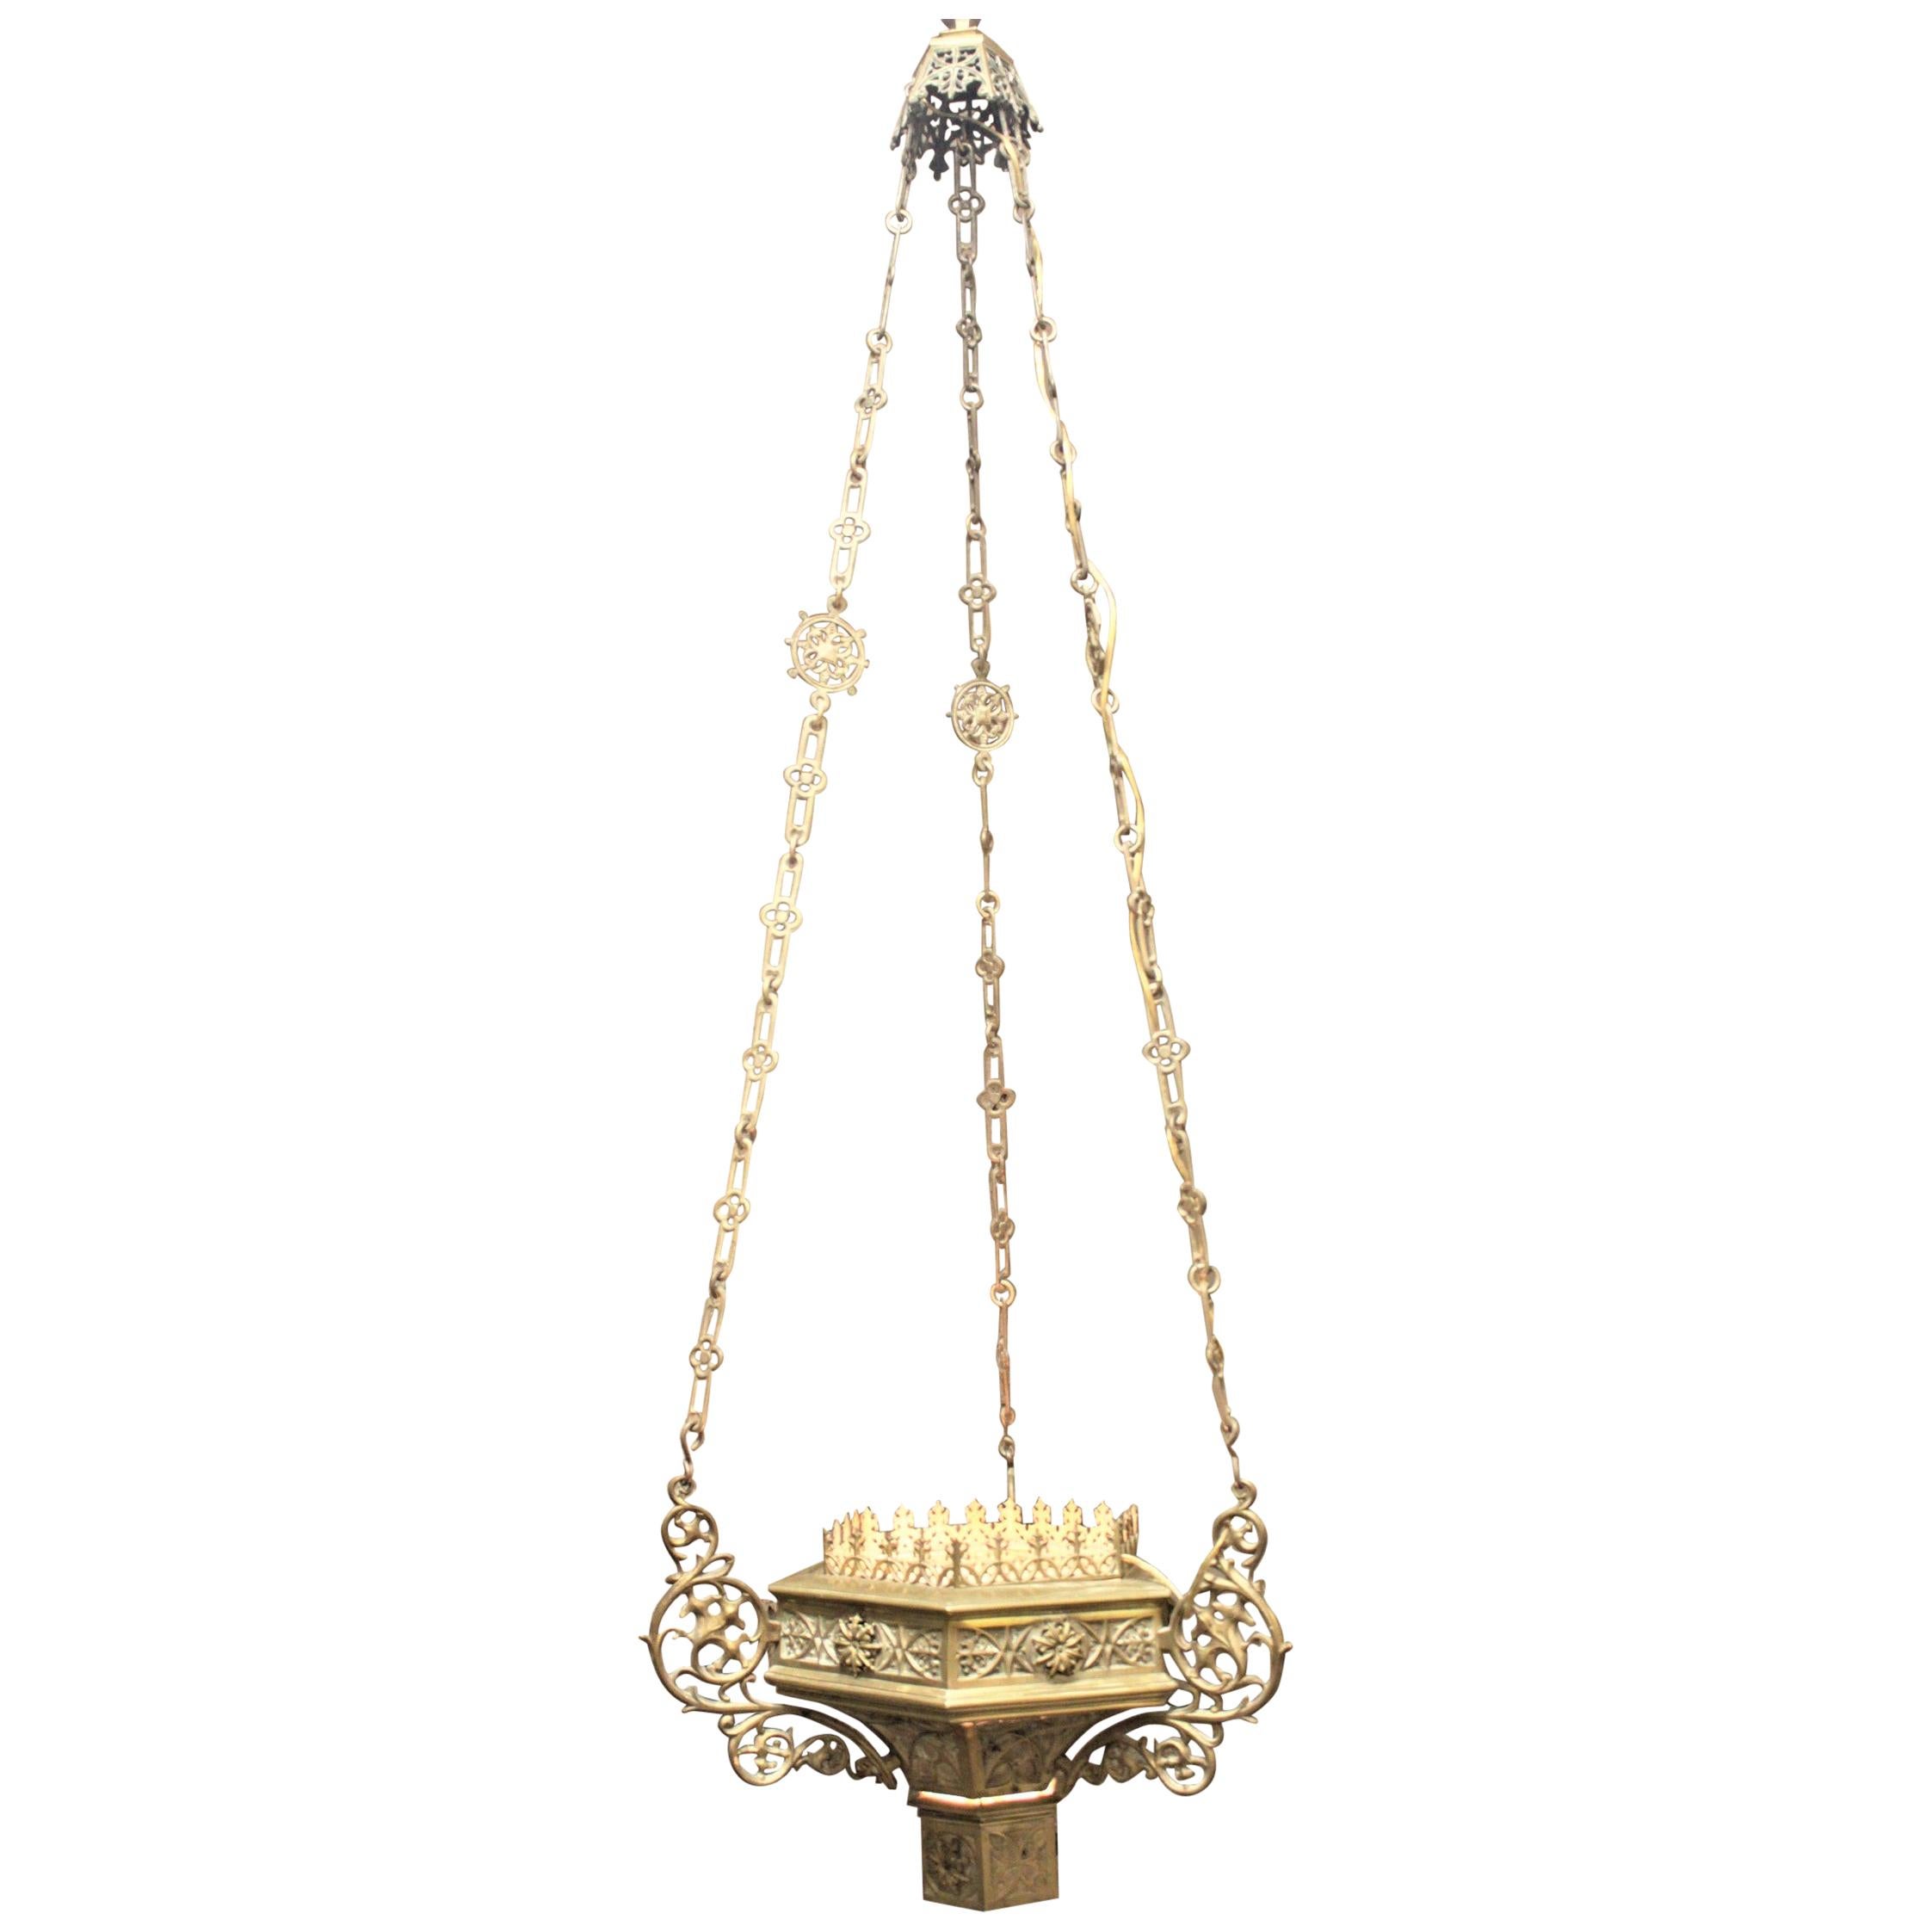 Antique Solid Cast Brass Gothic Revival Hanging Chandelier or Light Fixture For Sale